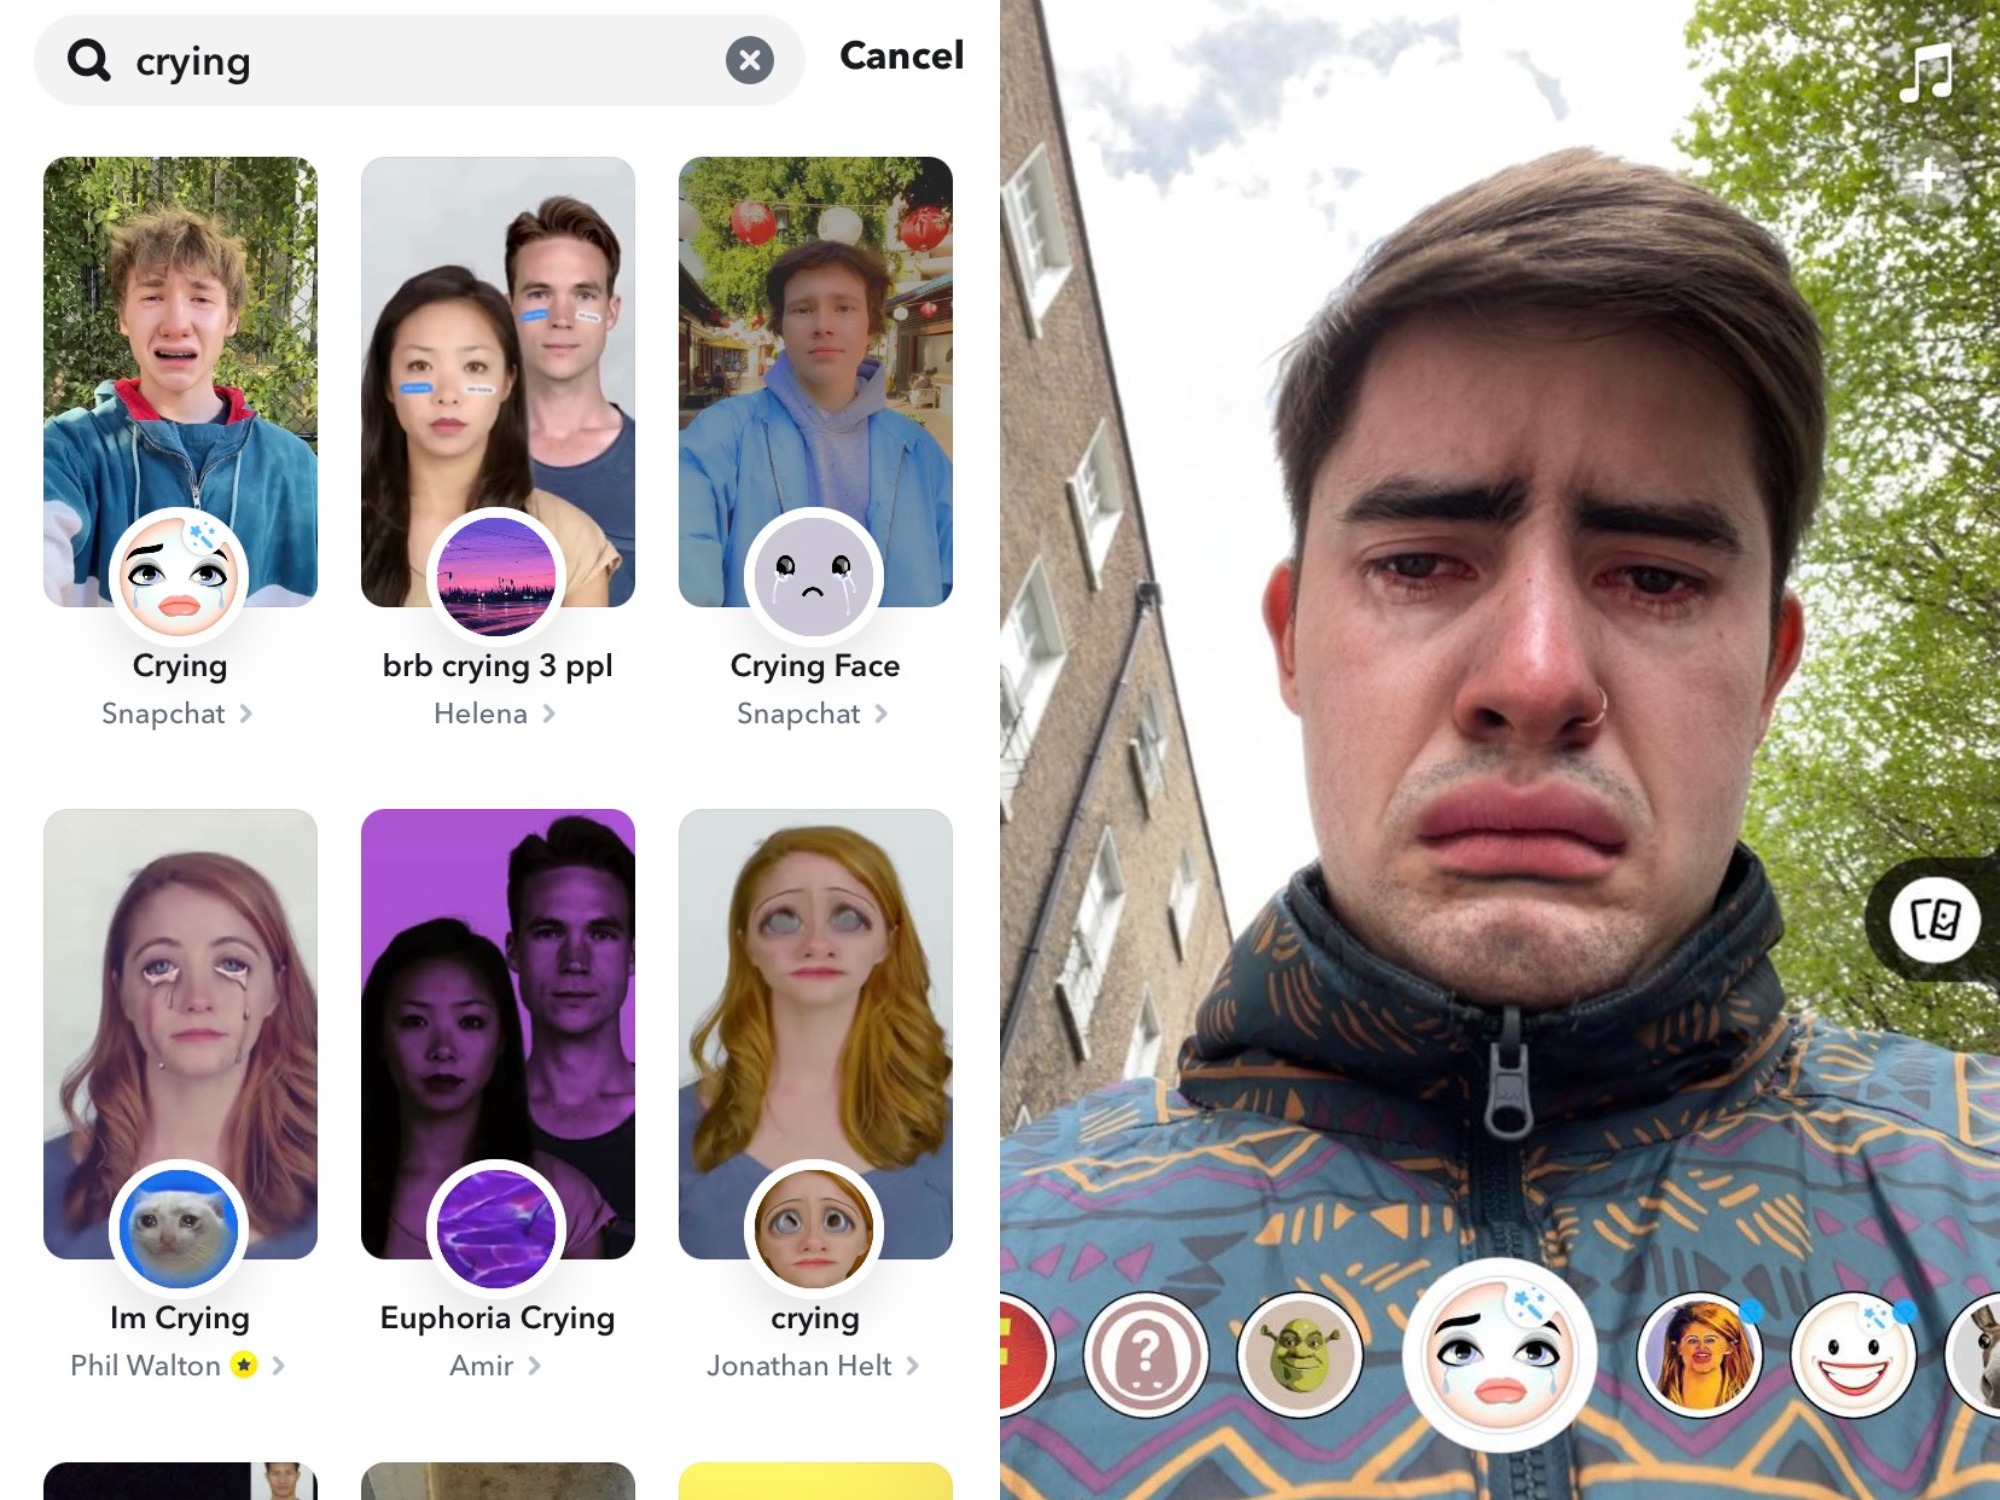 How To Get the Sad Face Filter Taking Over TikTok by Using Snapchat